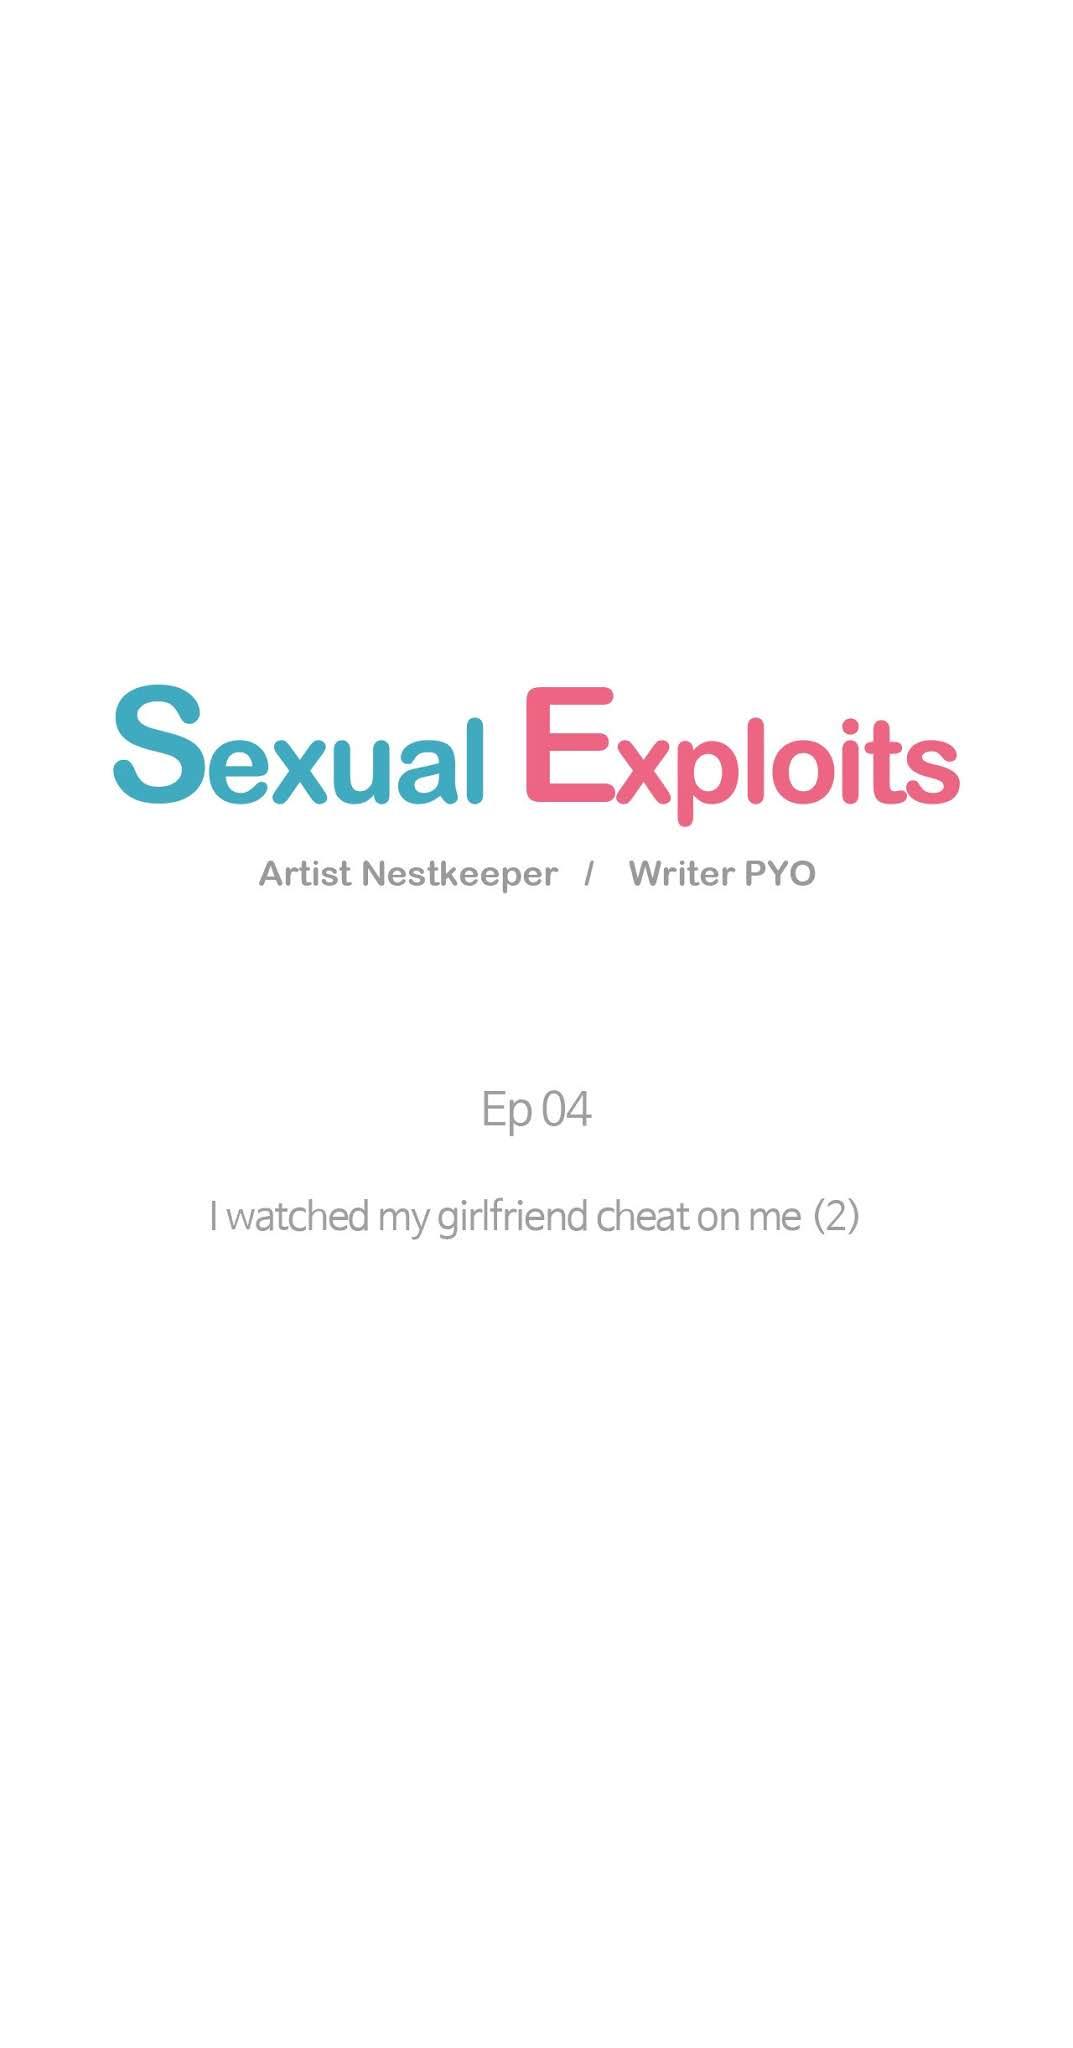 Sexual Exploits - I watched my girlfriend cheat on me 42